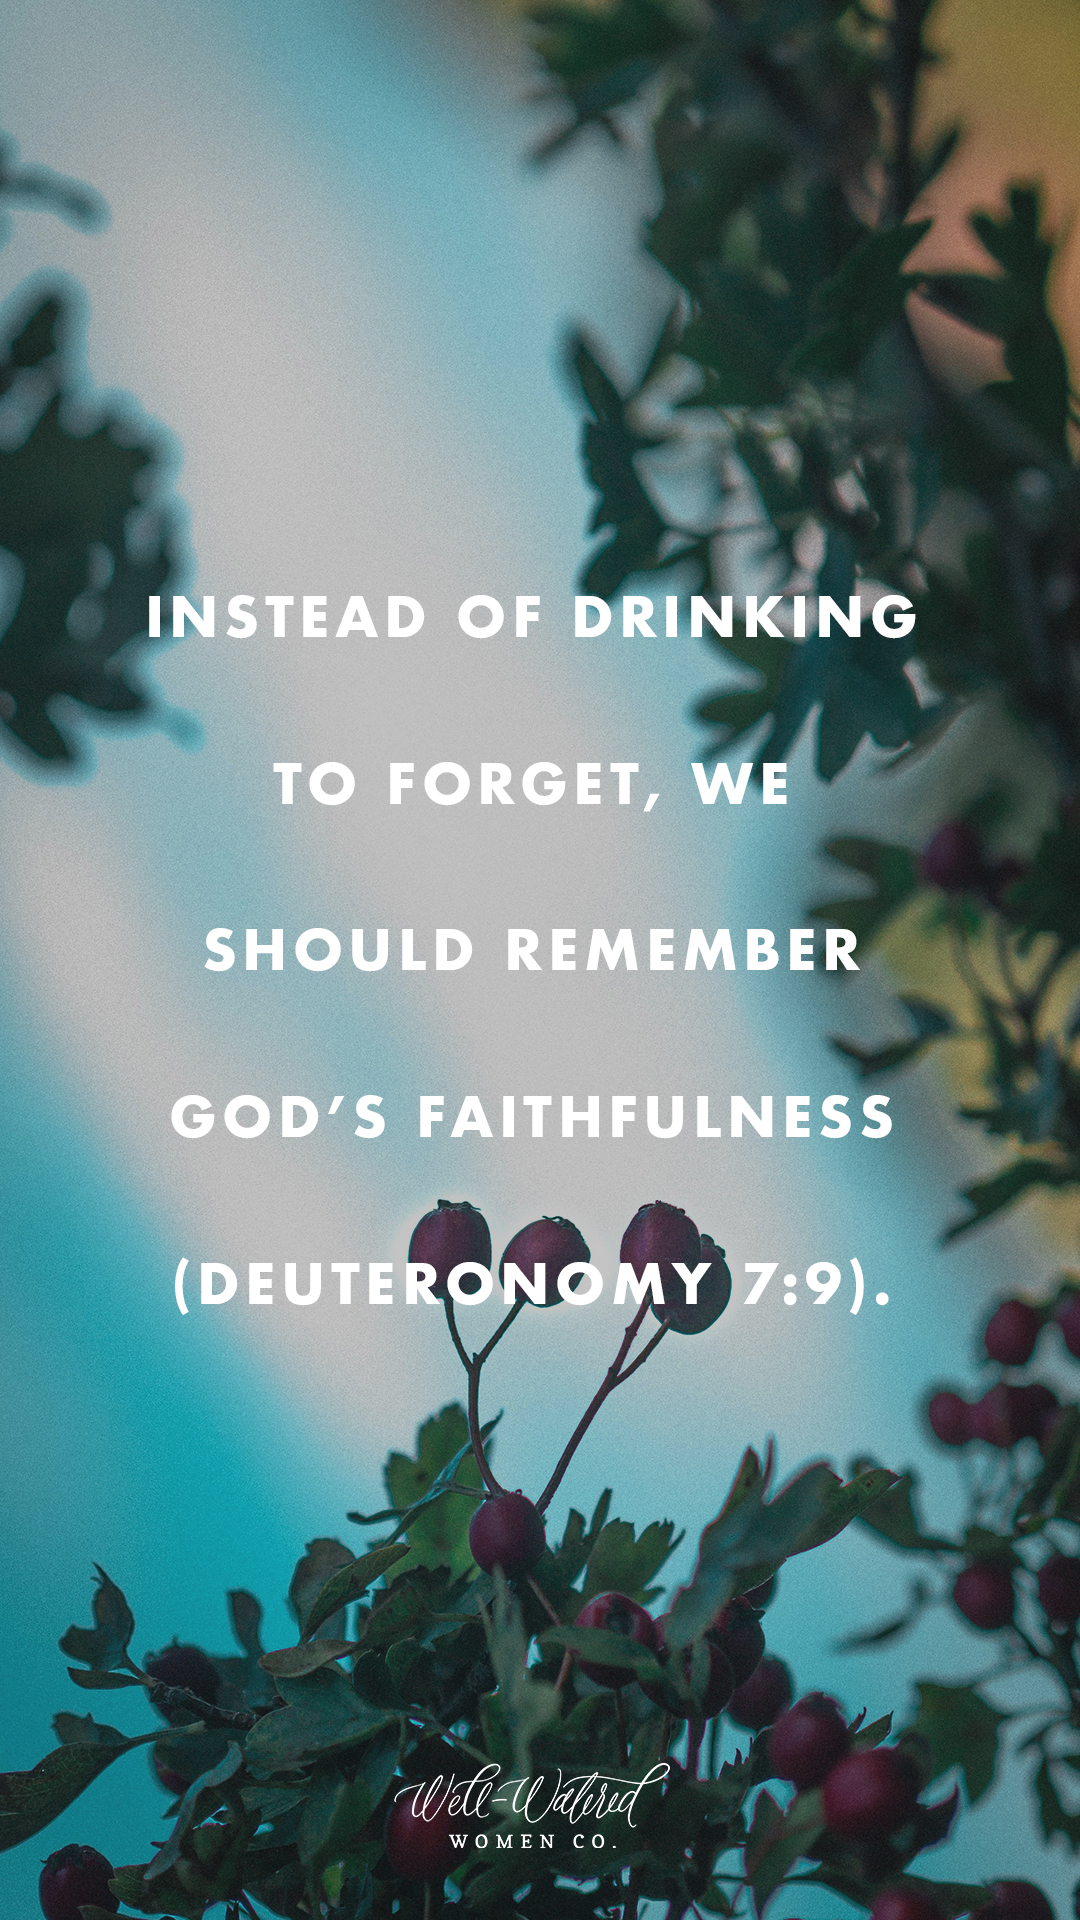 Instead of drinking to forget, we should remember God’s faithfulness (Deuteronomy 7-9)